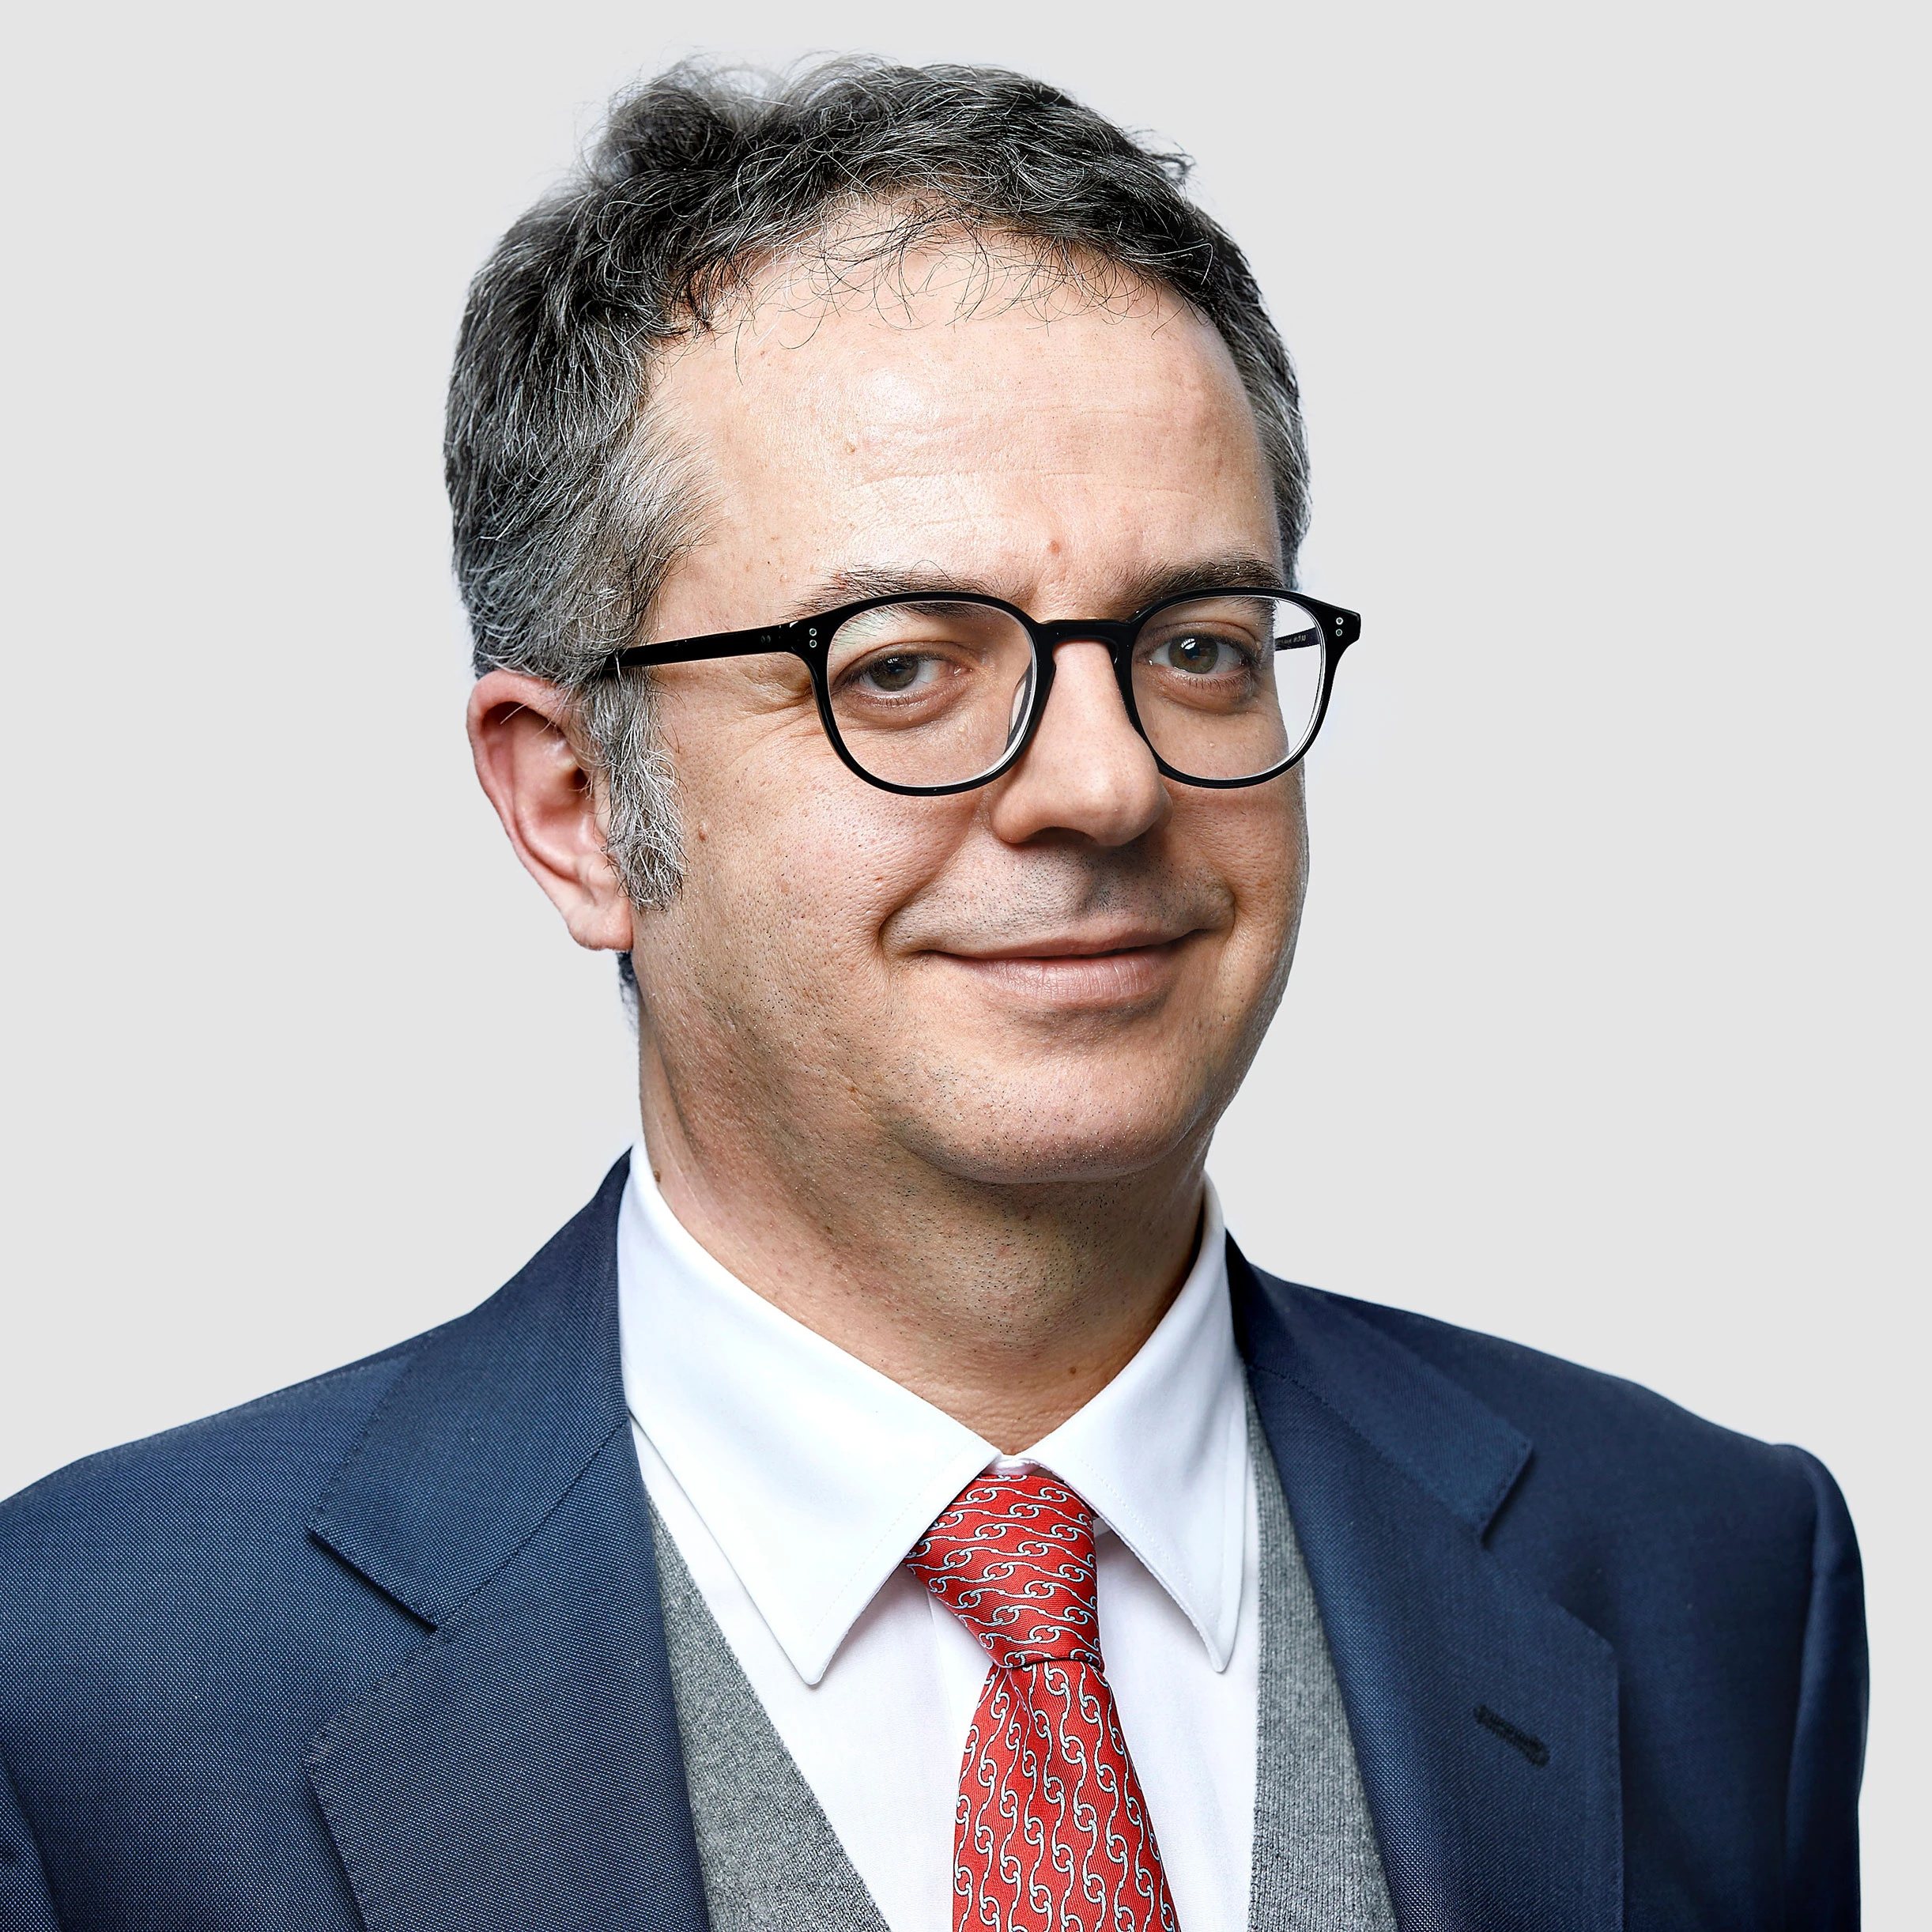 Donato Saponara, Head of Italy and Head of Transactions for Western Europe, Allianz Real Estate